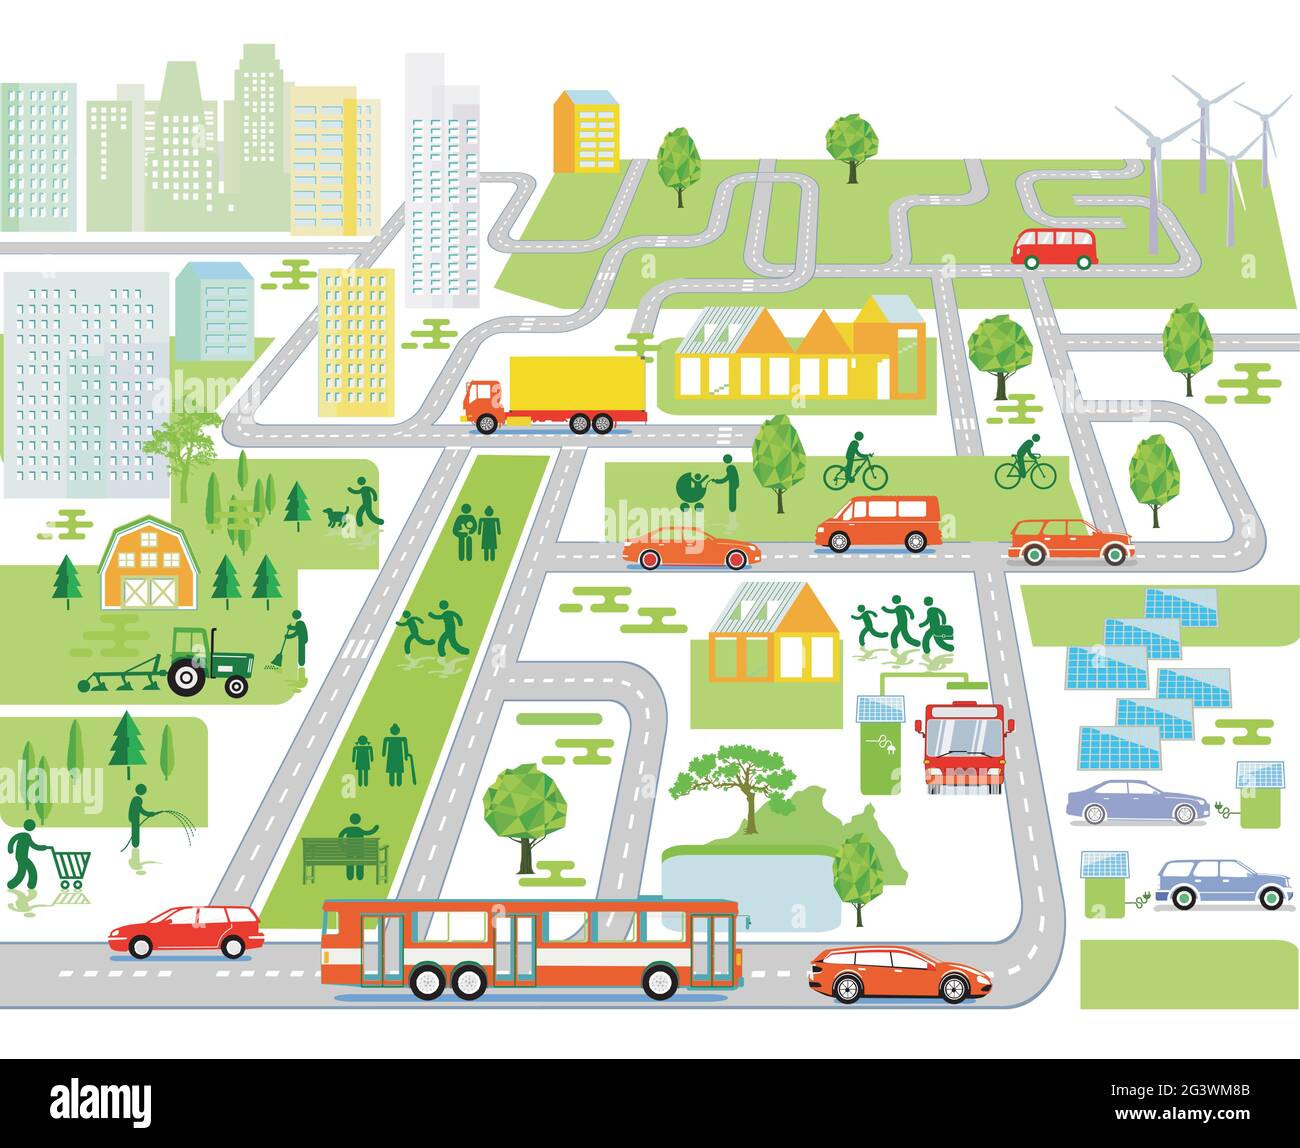 Streets with cars pedestrians and houses Stock Vector